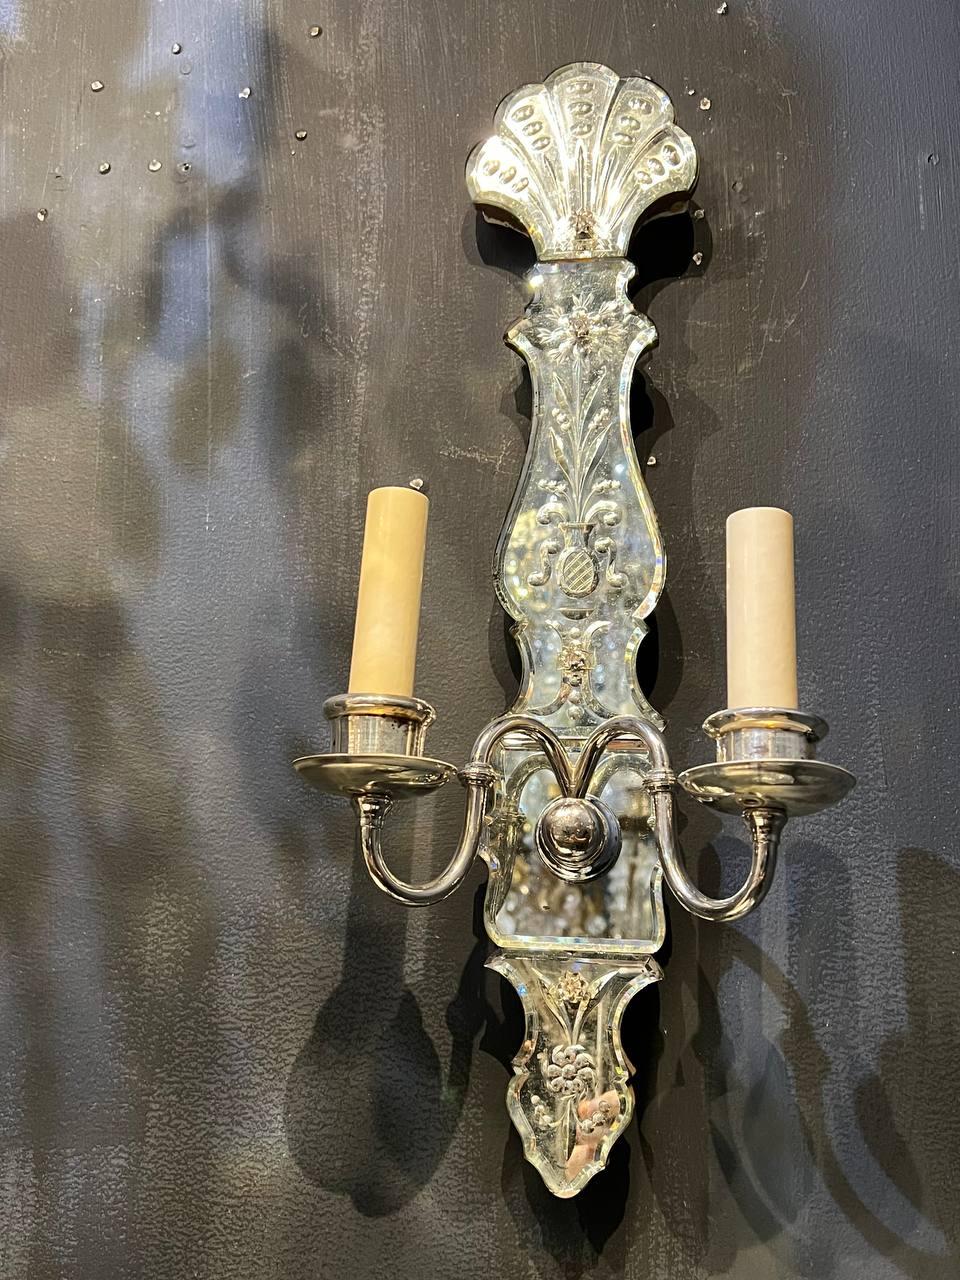 American Classical 1900's Caldwell Etched Mirror 2 Lights Sconces For Sale